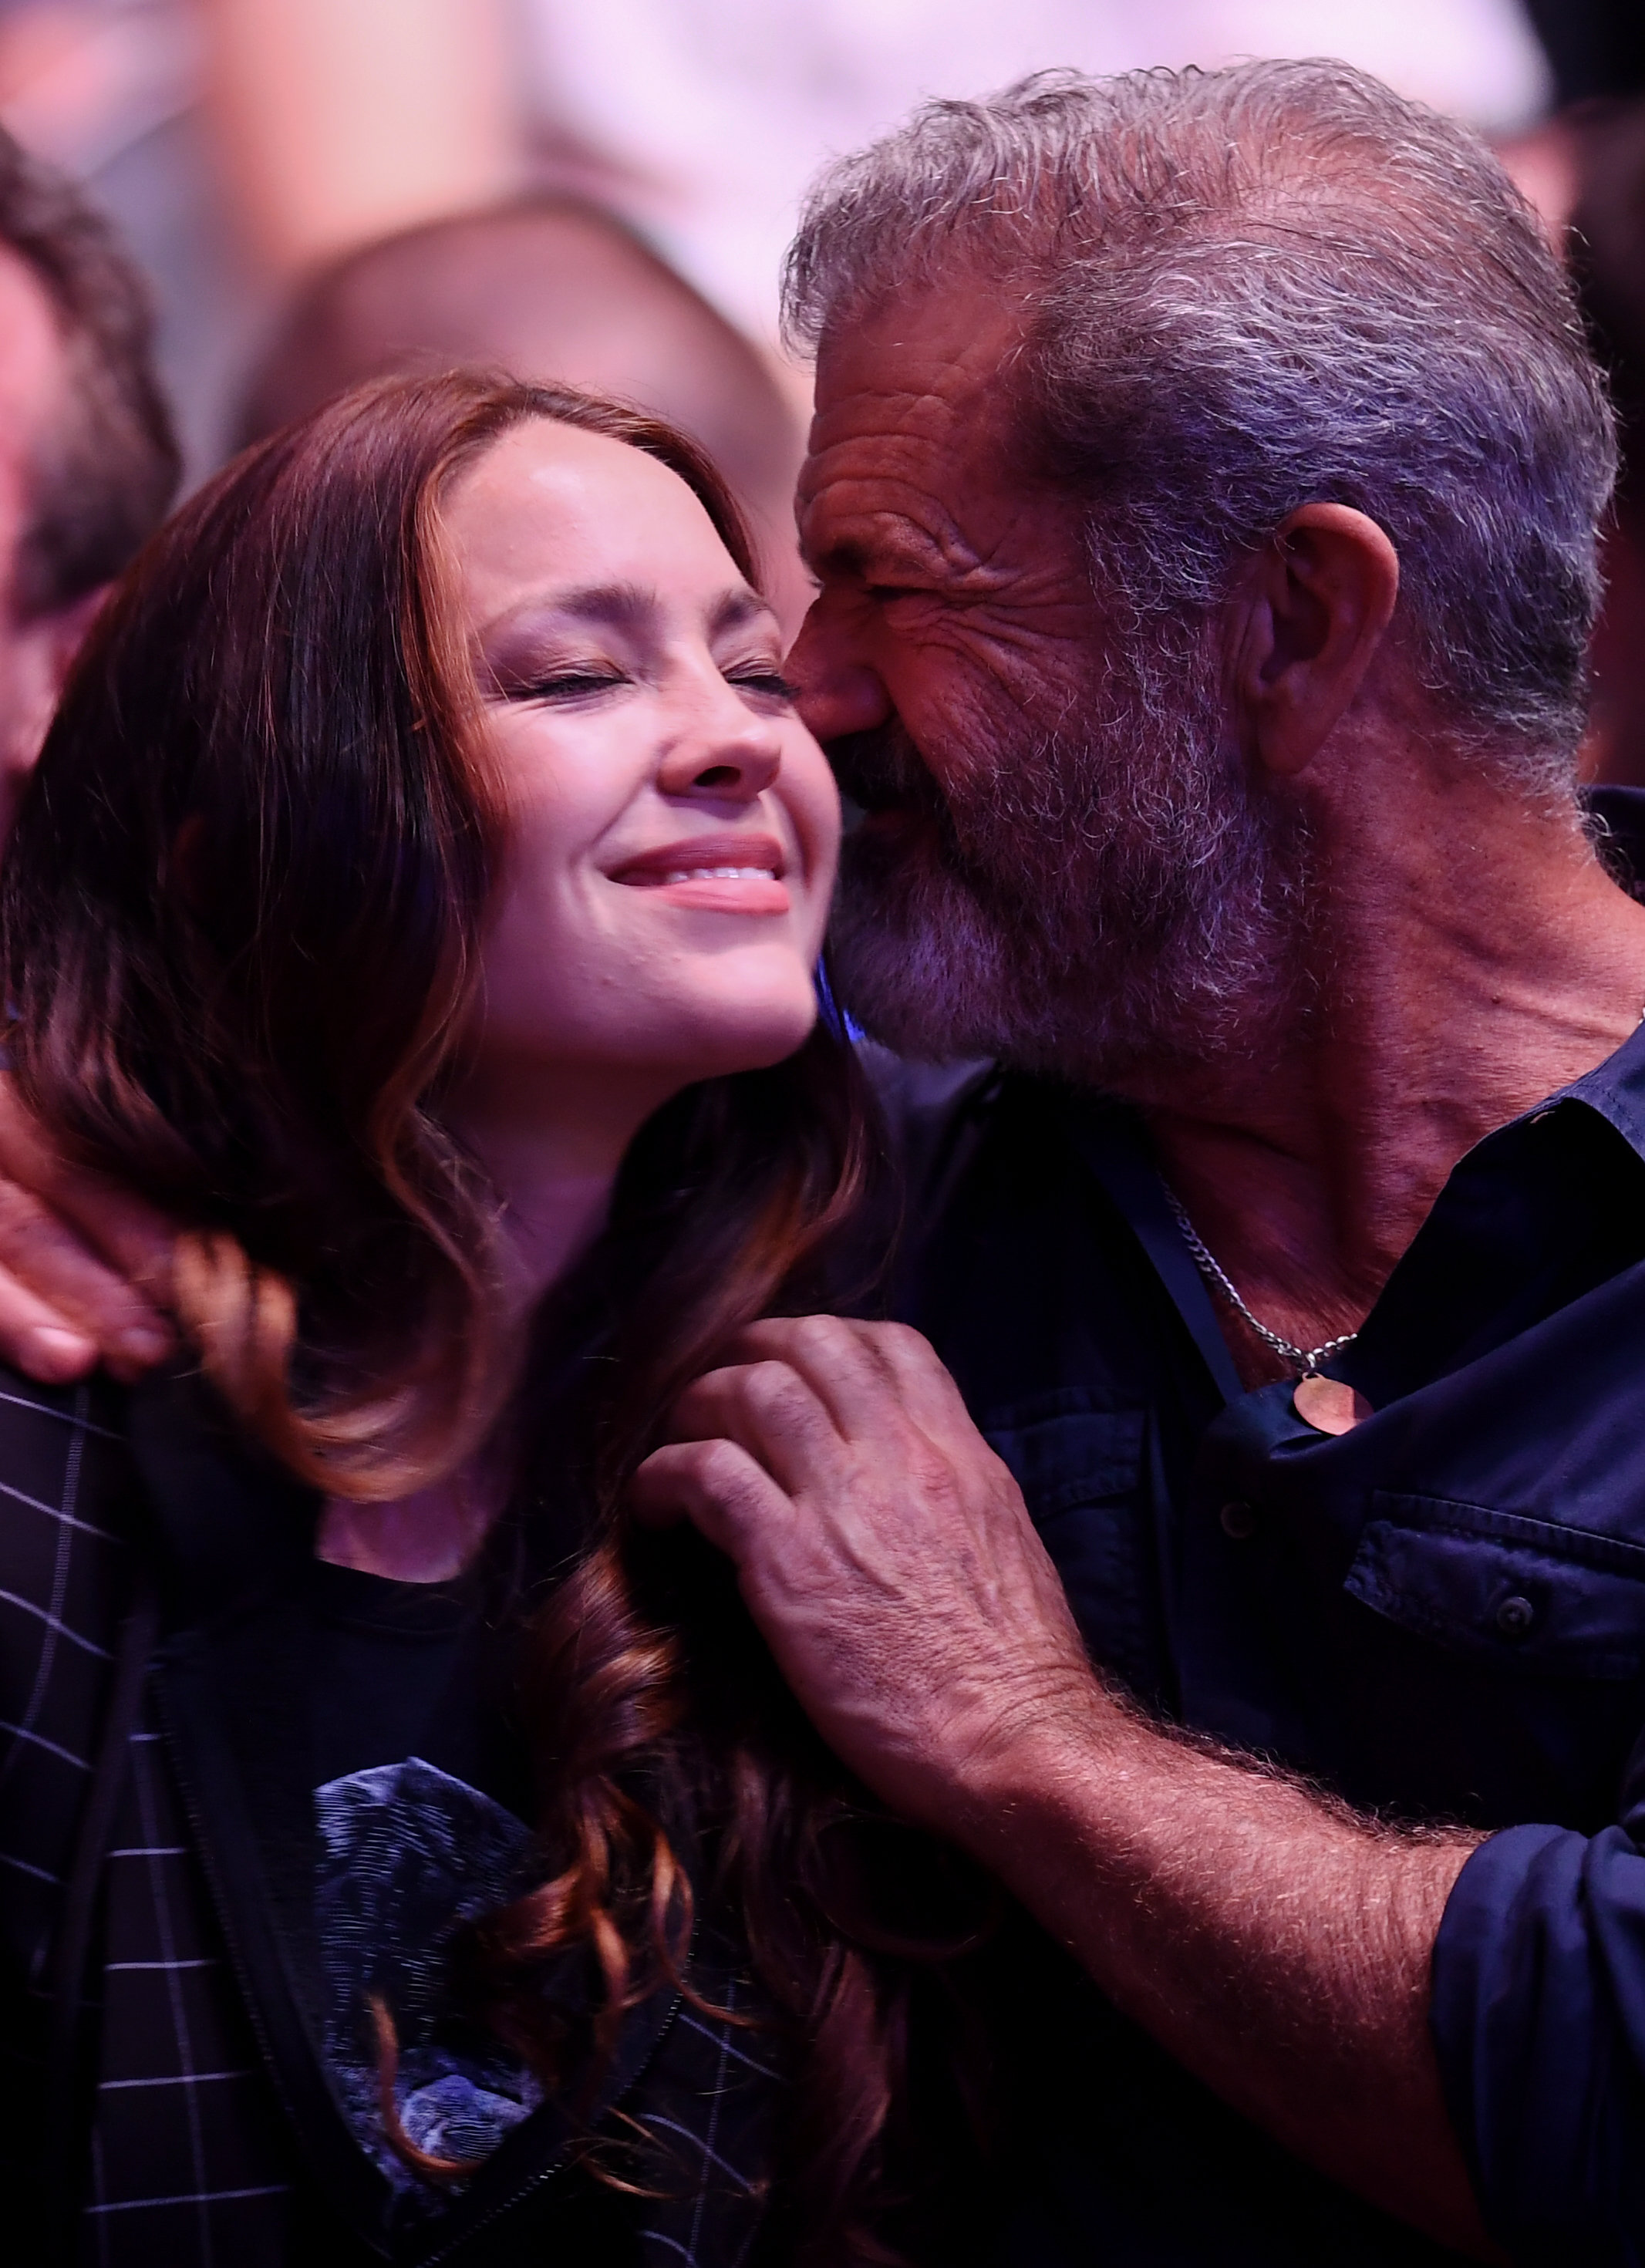 Rosalind Ross and Mel Gibson at the UFC 229 in Las Vegas on October 6, 2018│ Source: Getty Images